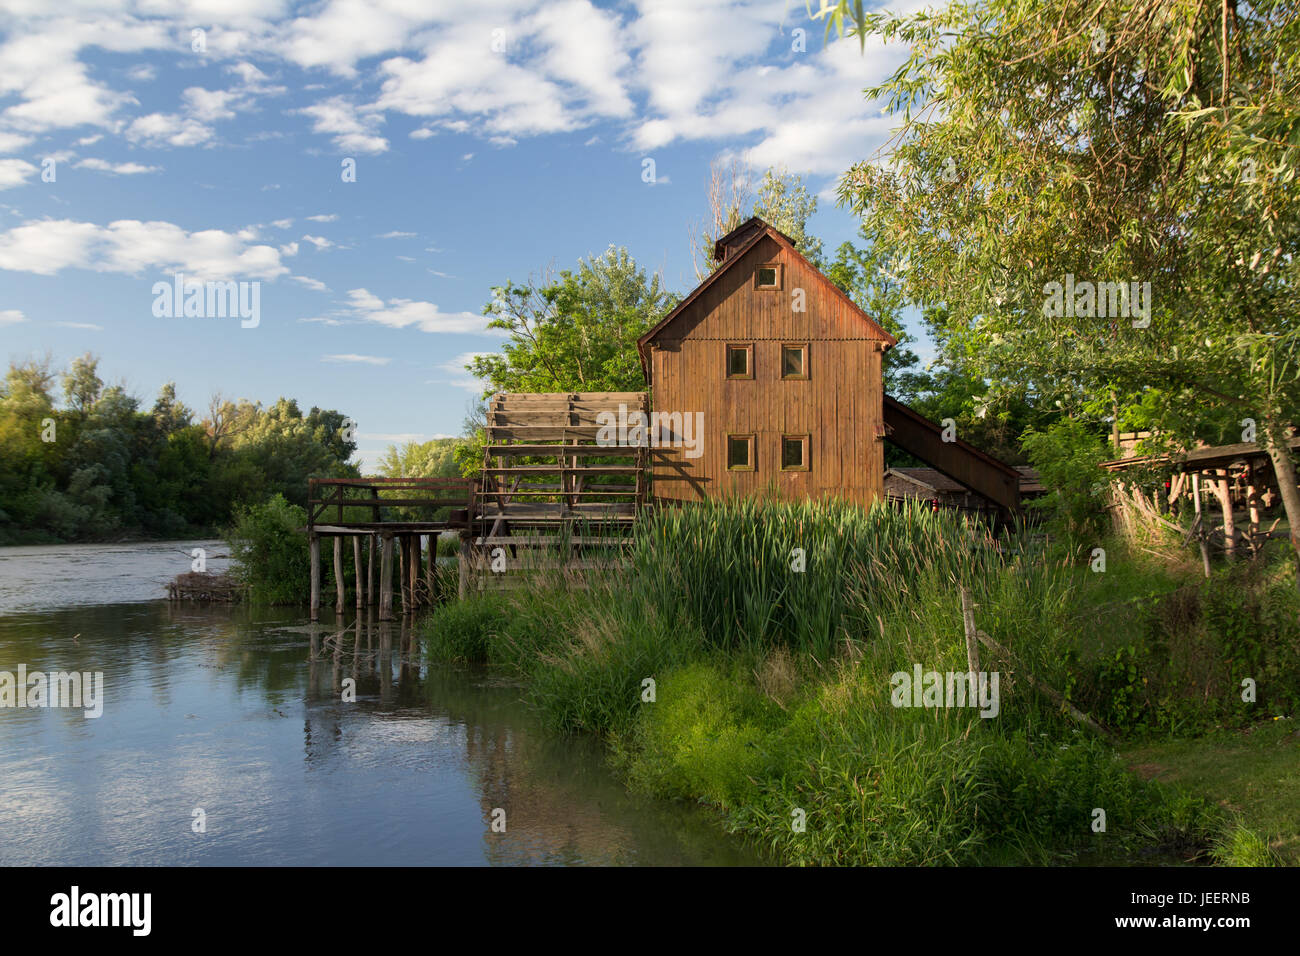 wooden watermill house near the river Stock Photo